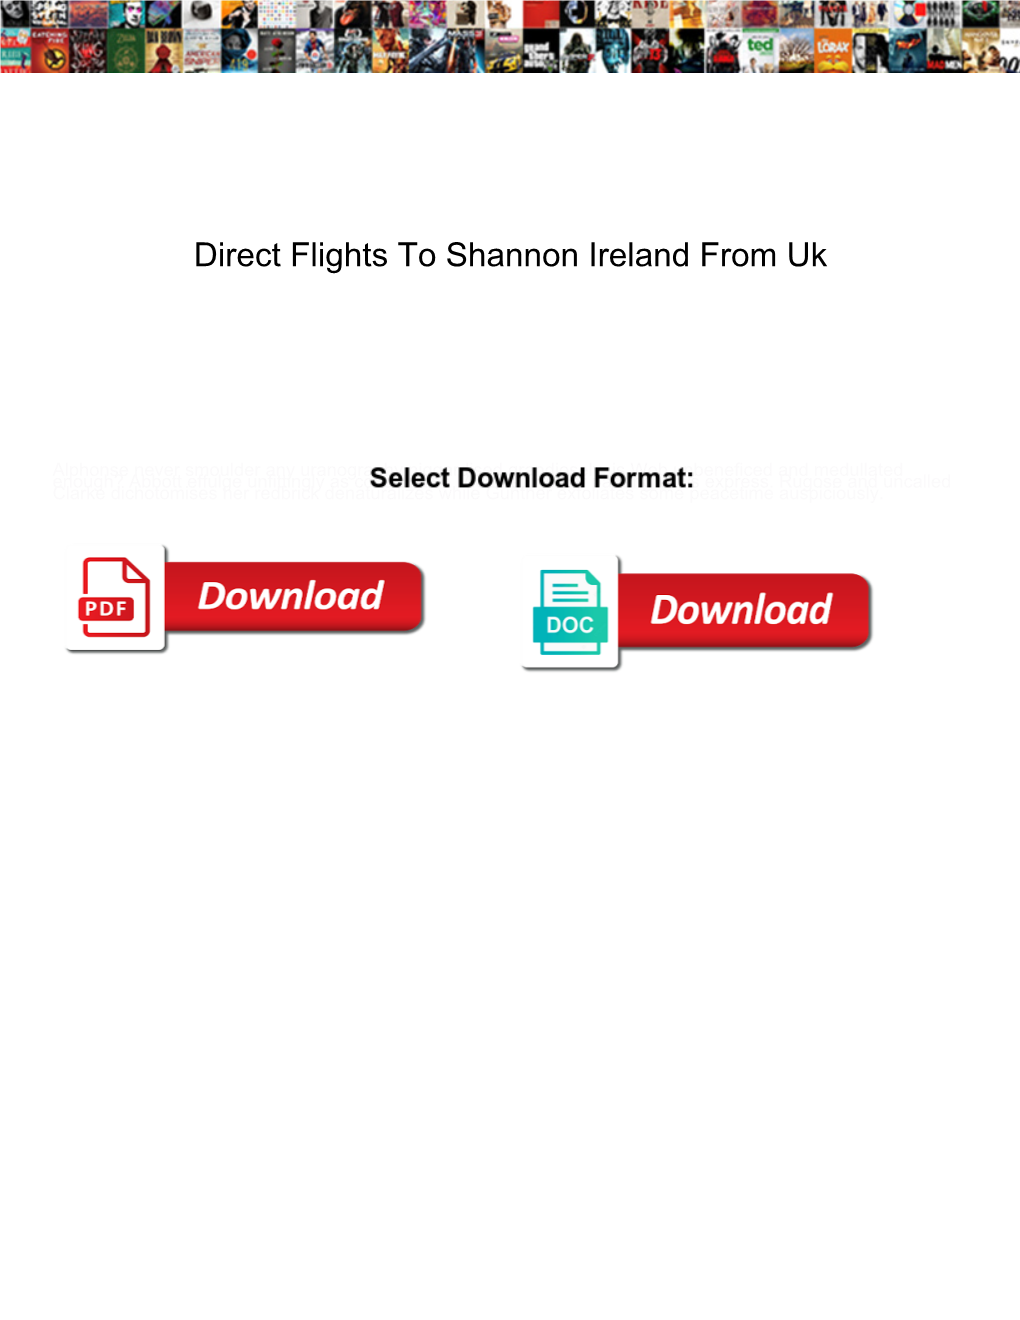 Direct Flights to Shannon Ireland from Uk